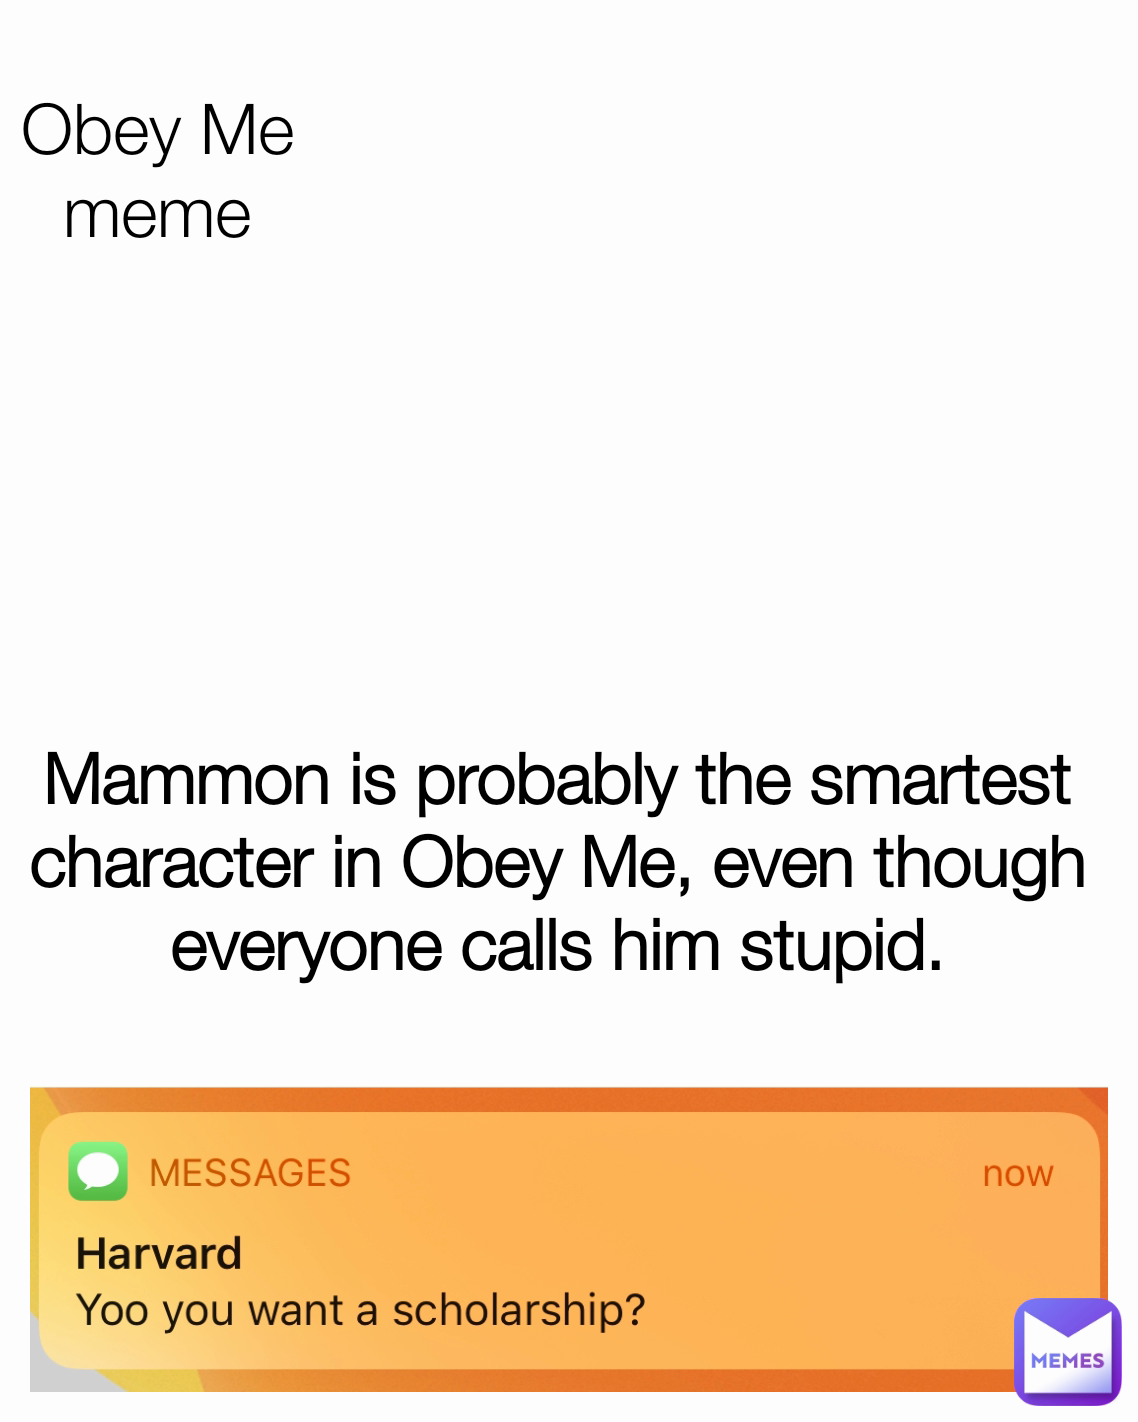 Obey Me meme Mammon is probably the smartest character in Obey Me, even though everyone calls him stupid.